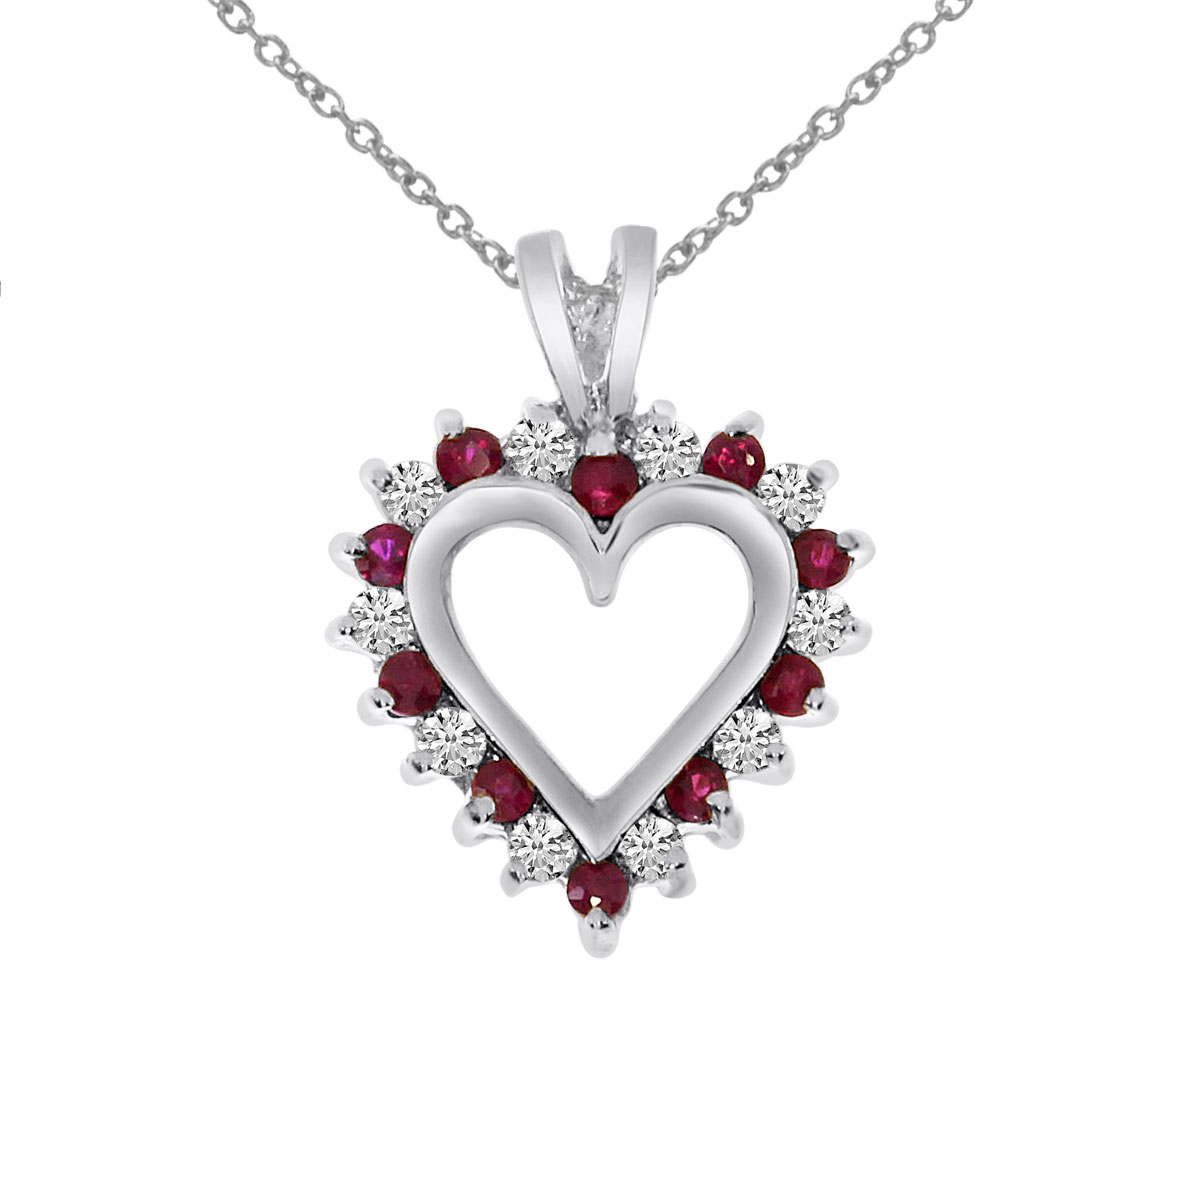 JCX3032: A dazzling 14k white gold heart pendant surrounded by .25 carats of shimmering diamonds and .25 carats of beautiful rubies.